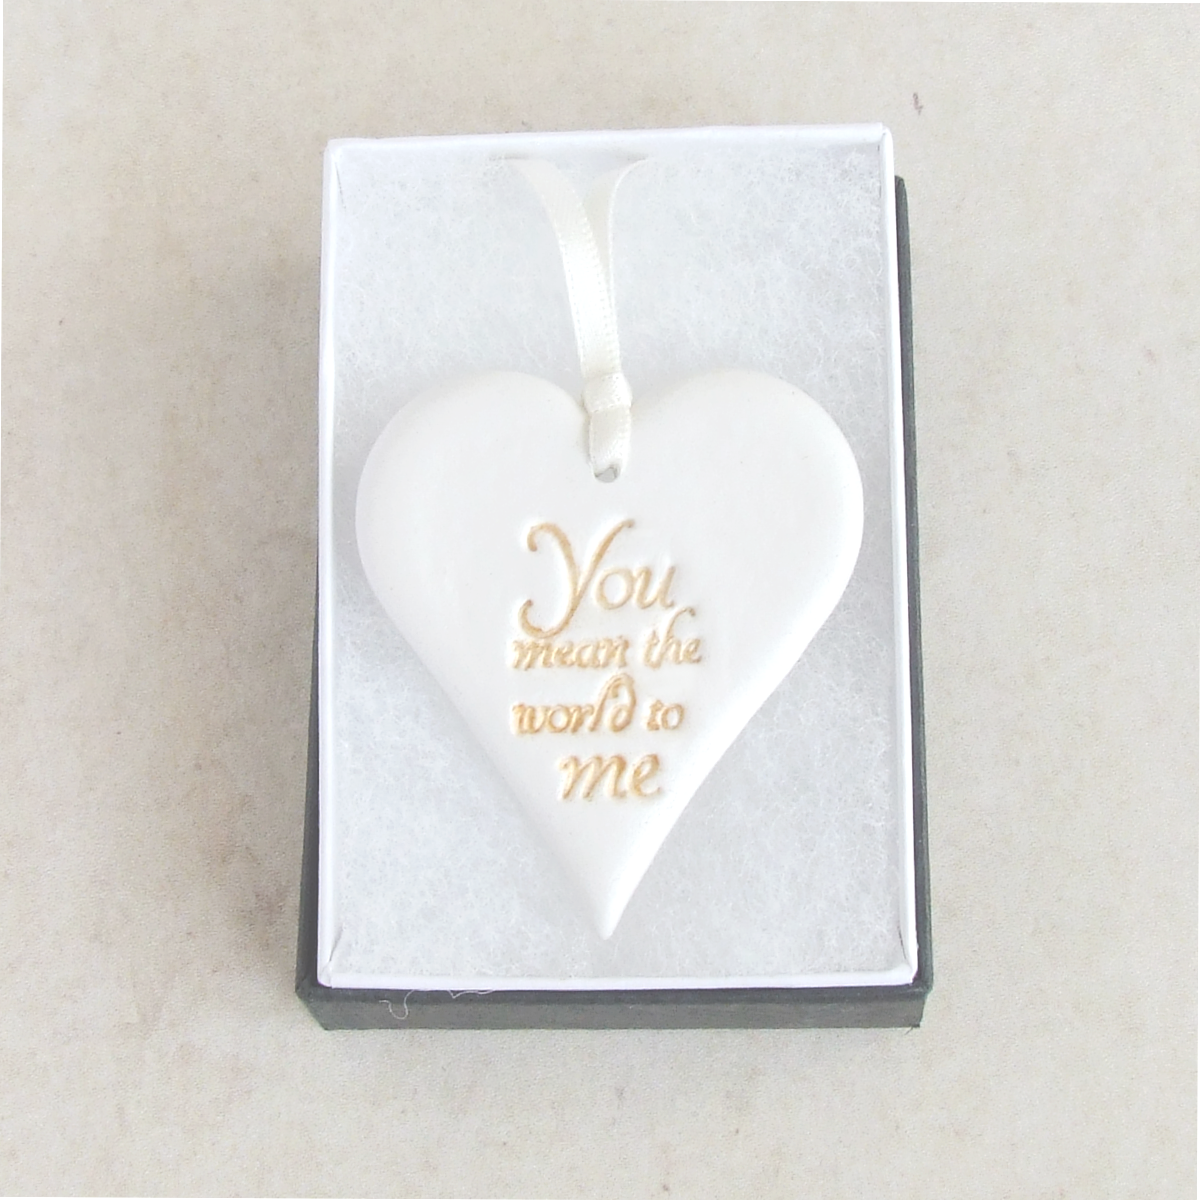 Heart shaped hanging ornament made from white clay with gold words 'You mean the world to me' , laying in a gift box.